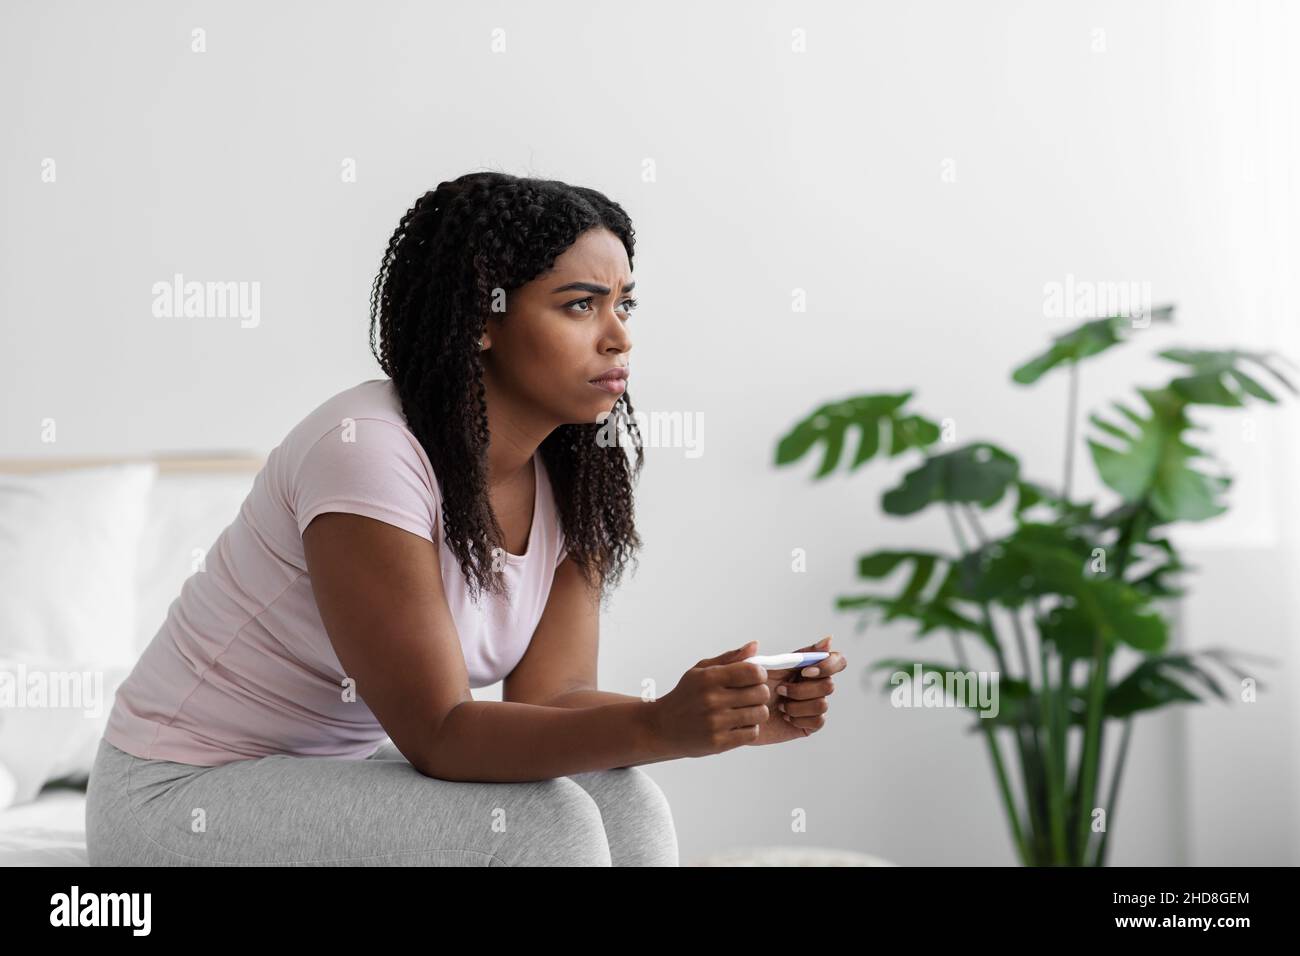 Frustrated sad young black woman sitting on bed and looking at negative pregnancy test have female health problems Stock Photo